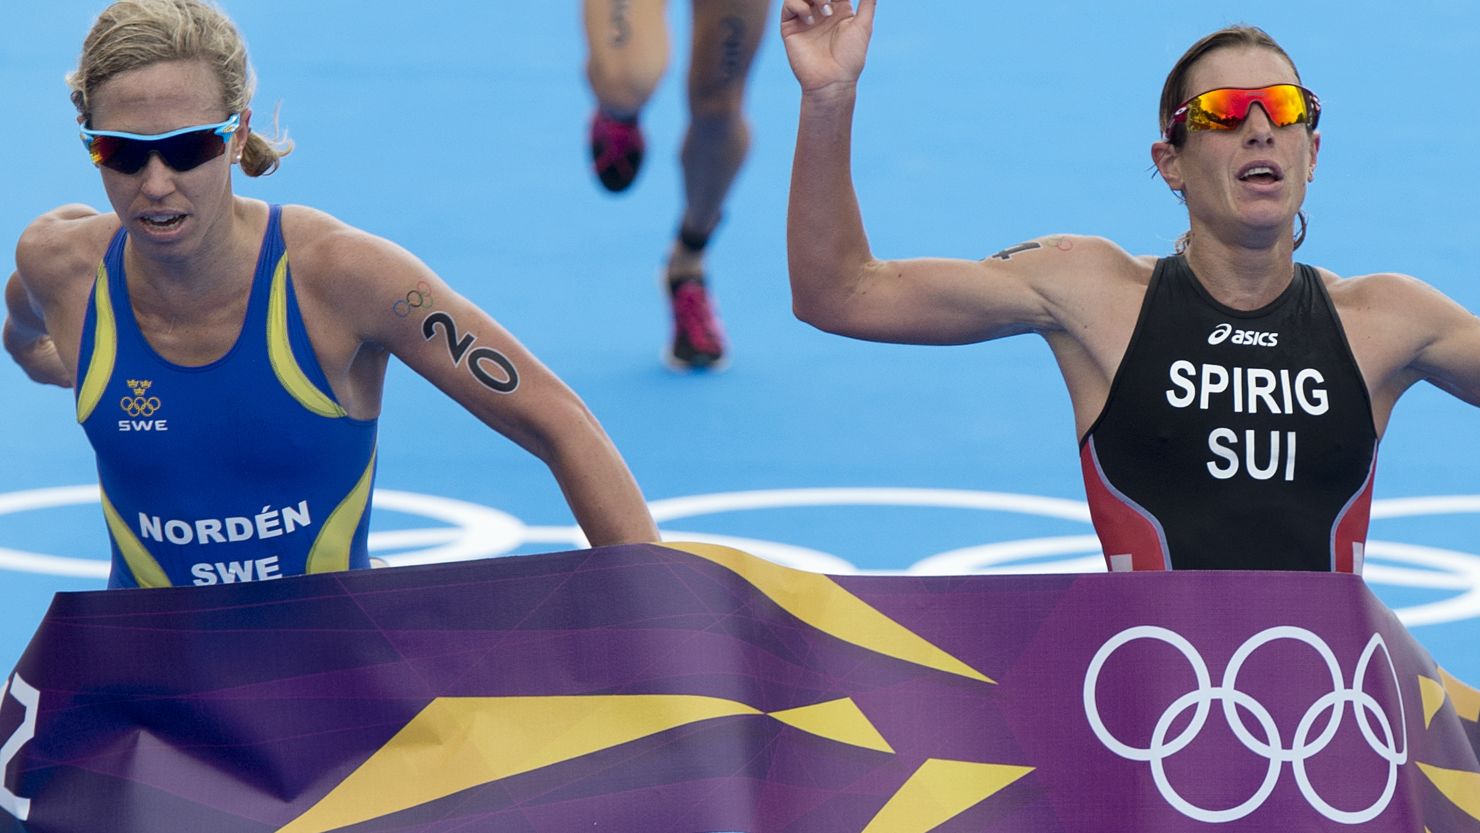 Laura Norden and Nicola Spirig both finished the race with the same time but the Swiss triathlete was awarded the gold.